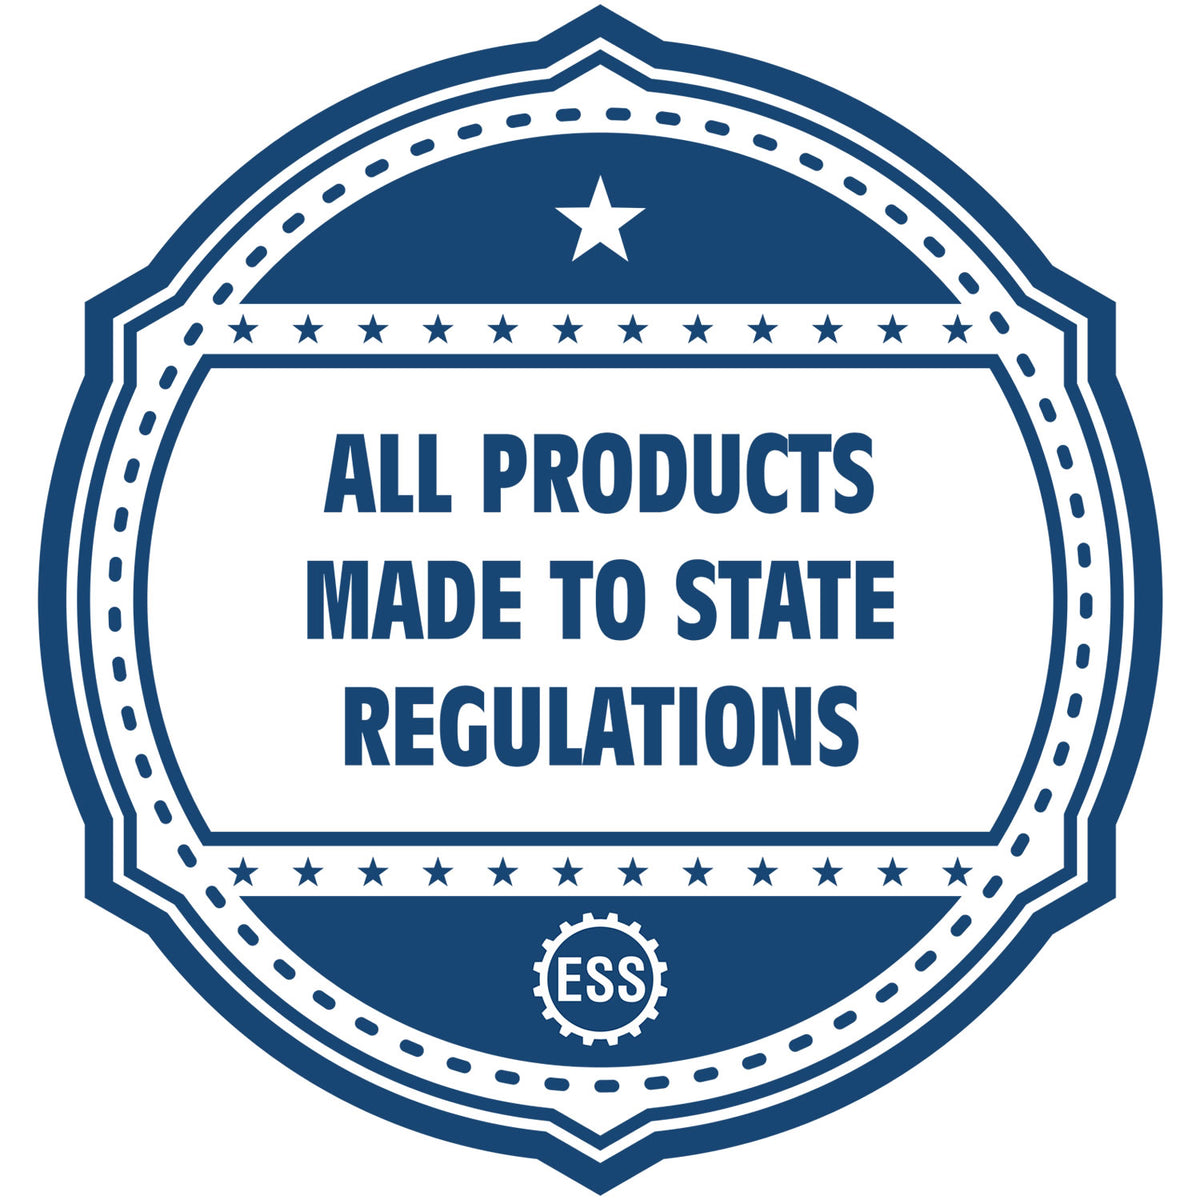 An icon or badge element for the Self-Inking New Hampshire Landscape Architect Stamp showing that this product is made in compliance with state regulations.